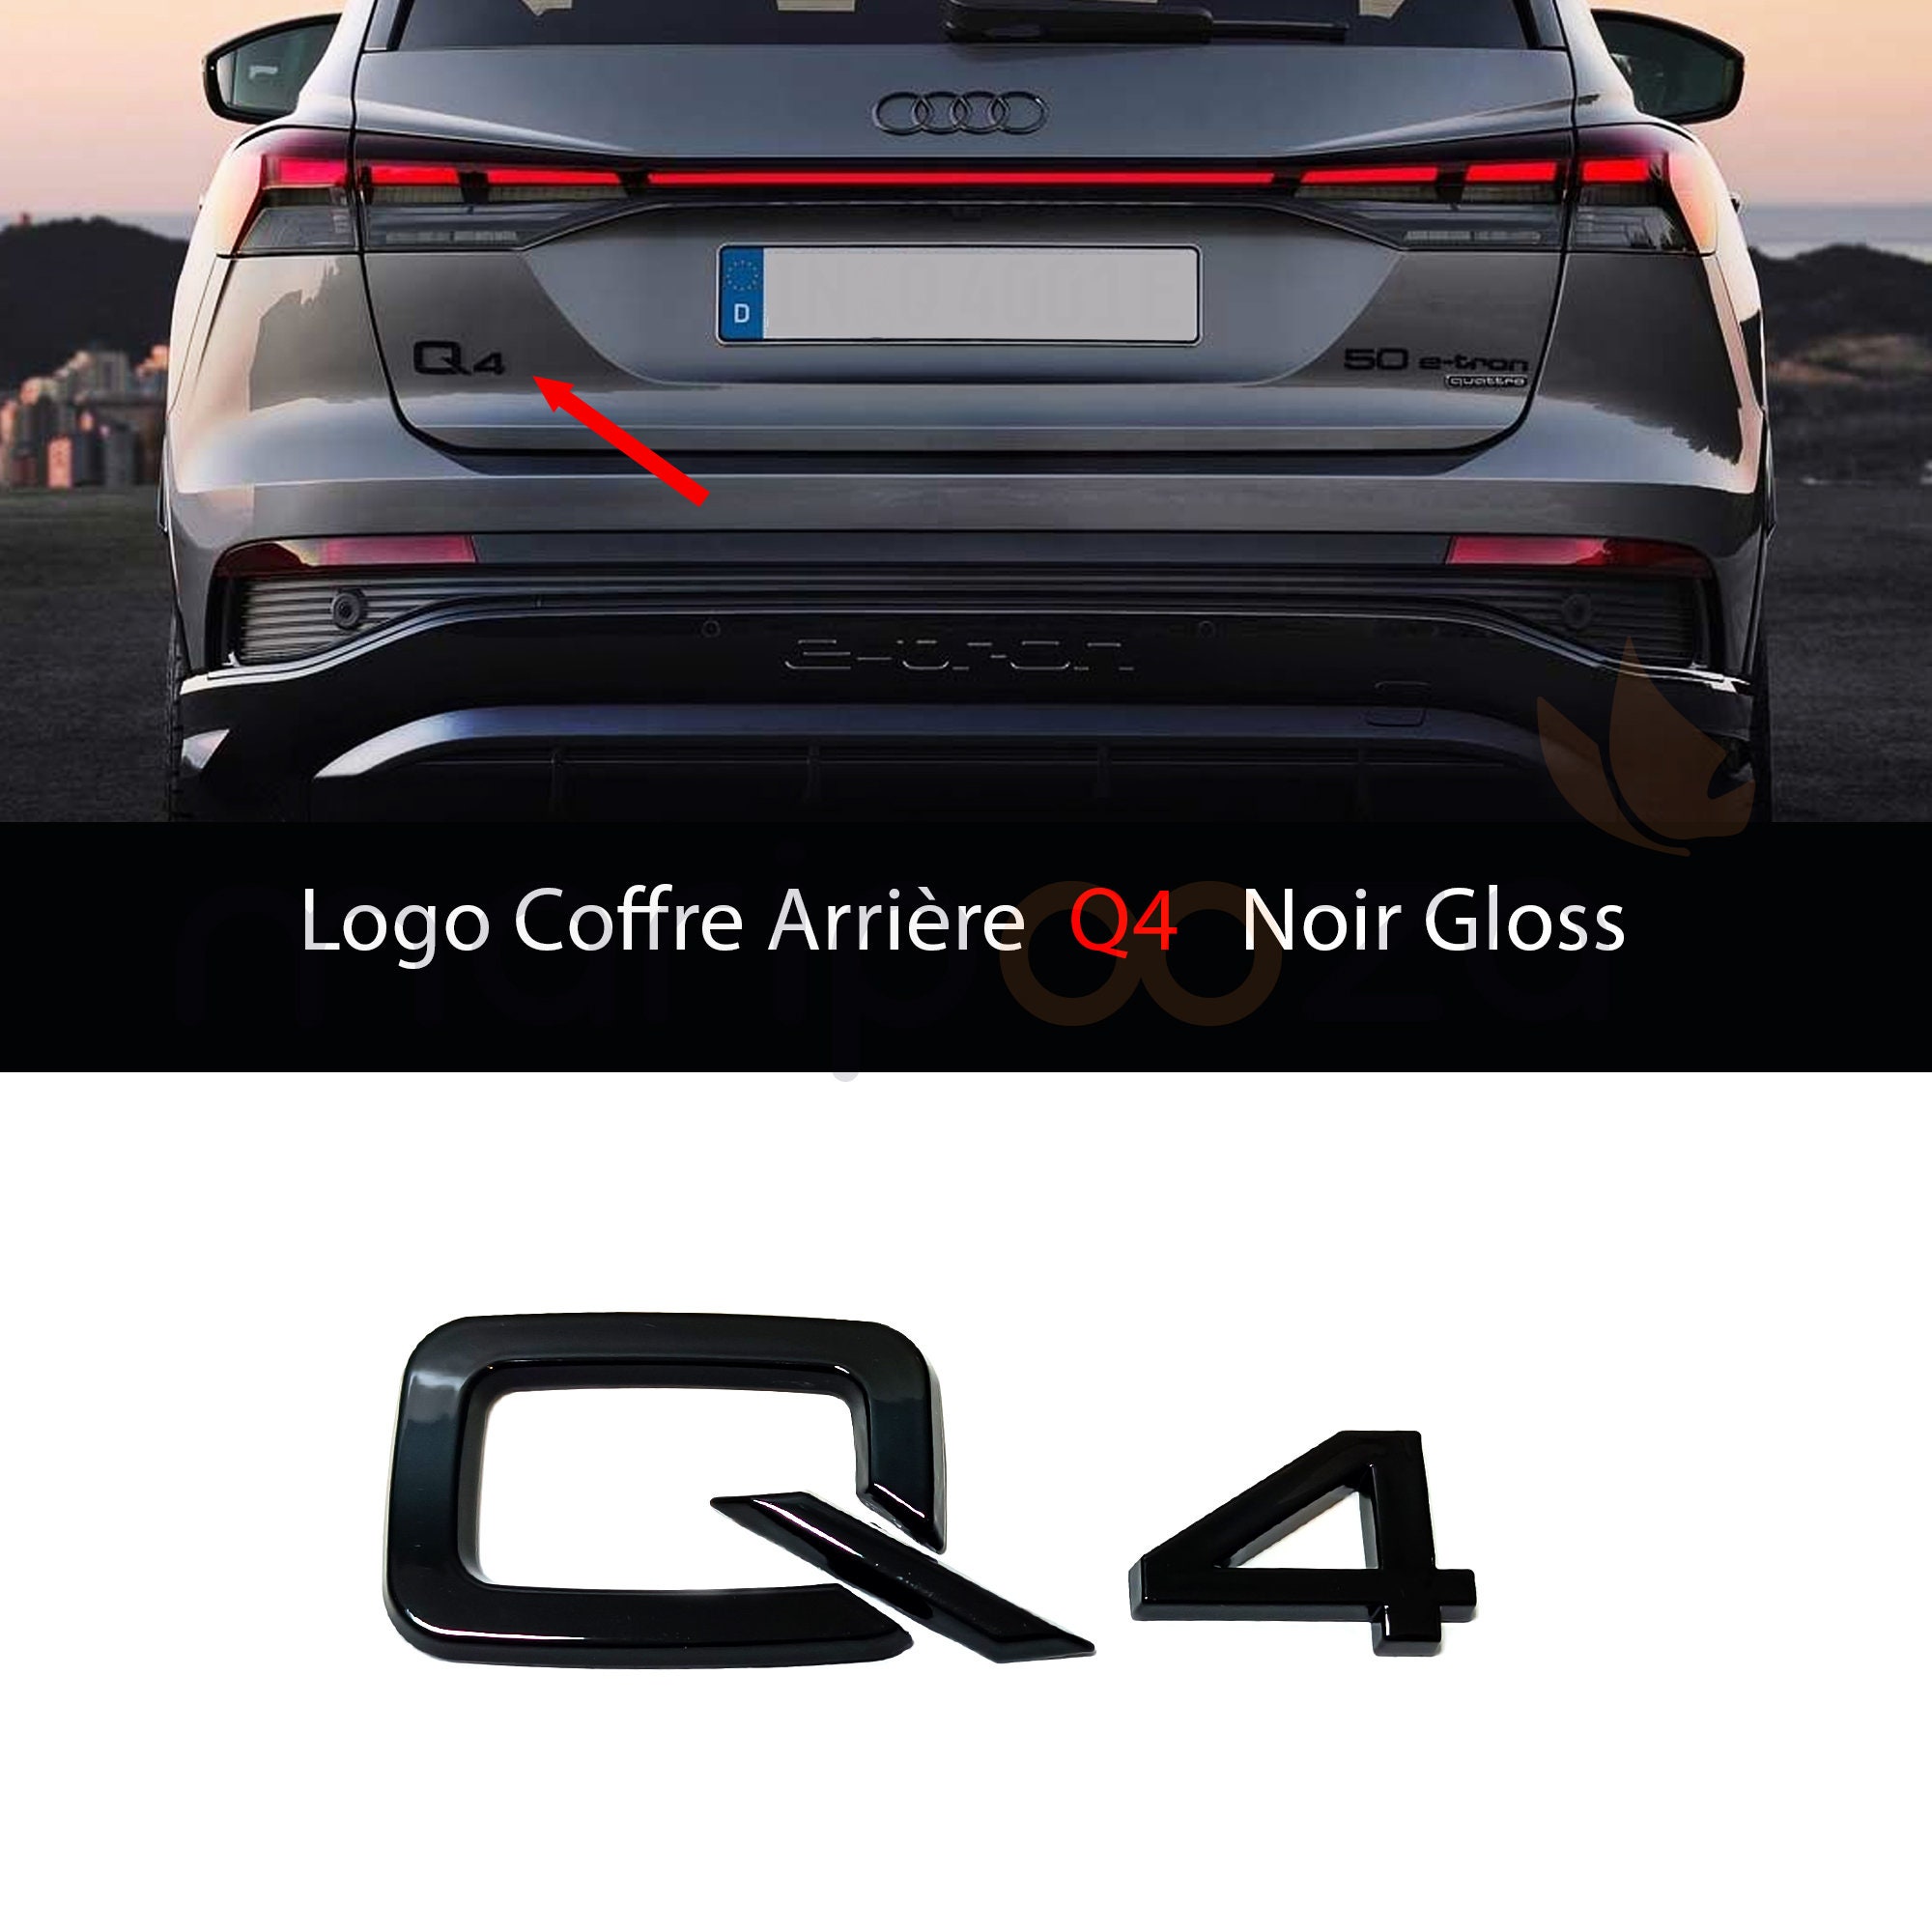 2 Stickers Audi A1 A2 A3 A4 A5 Q3 Q5 Q7 R8 TT Logo Sticker MIRROR Decal